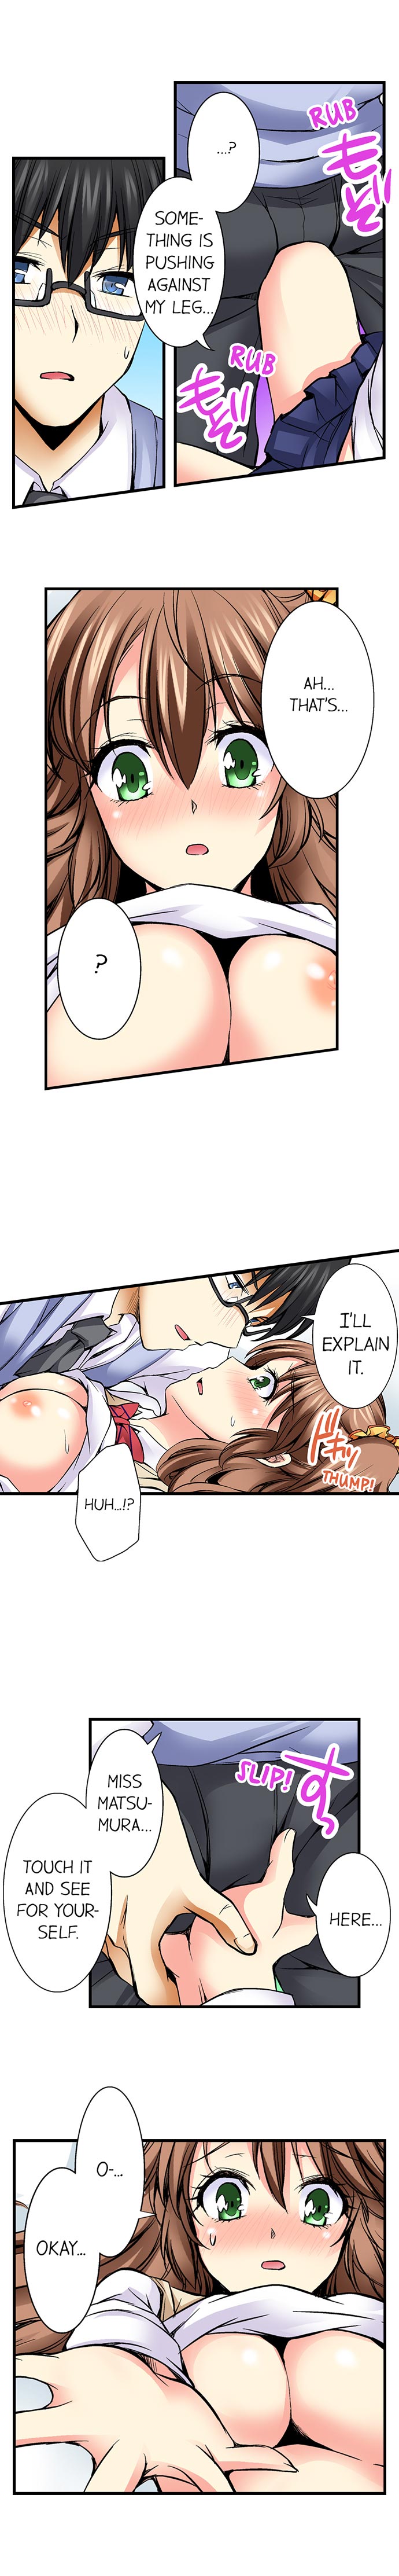 Why Can't i Have Sex With My Teacher? - Chapter 9 Page 2